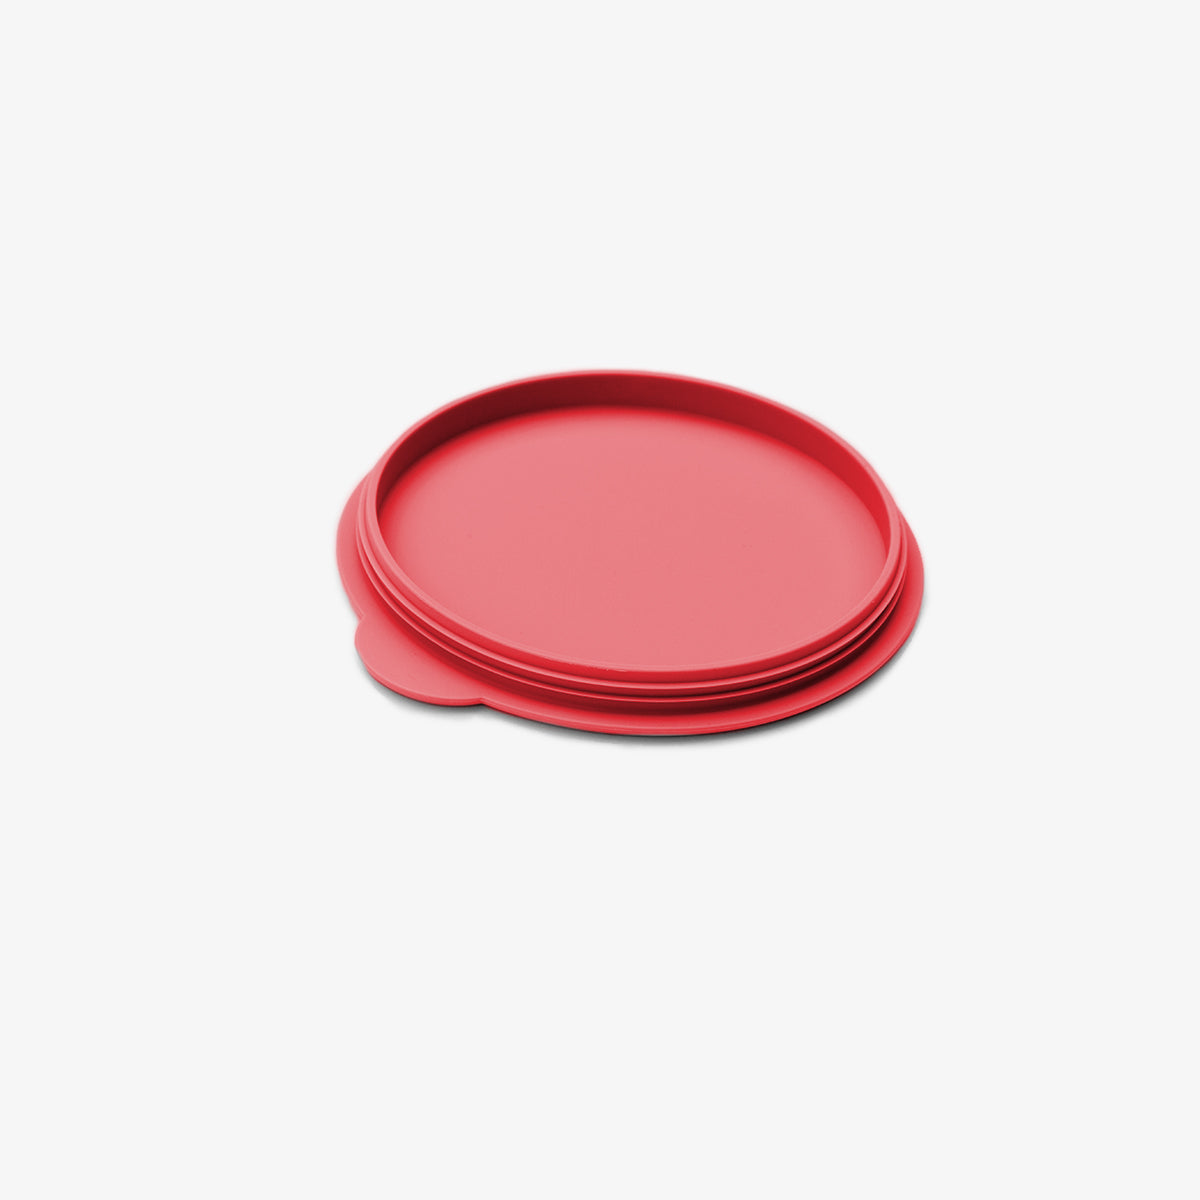 Mini Bowl Lid in Coral by ezpz / The Original All-In-One Silicone Plates & Placemats that Stick to the Table